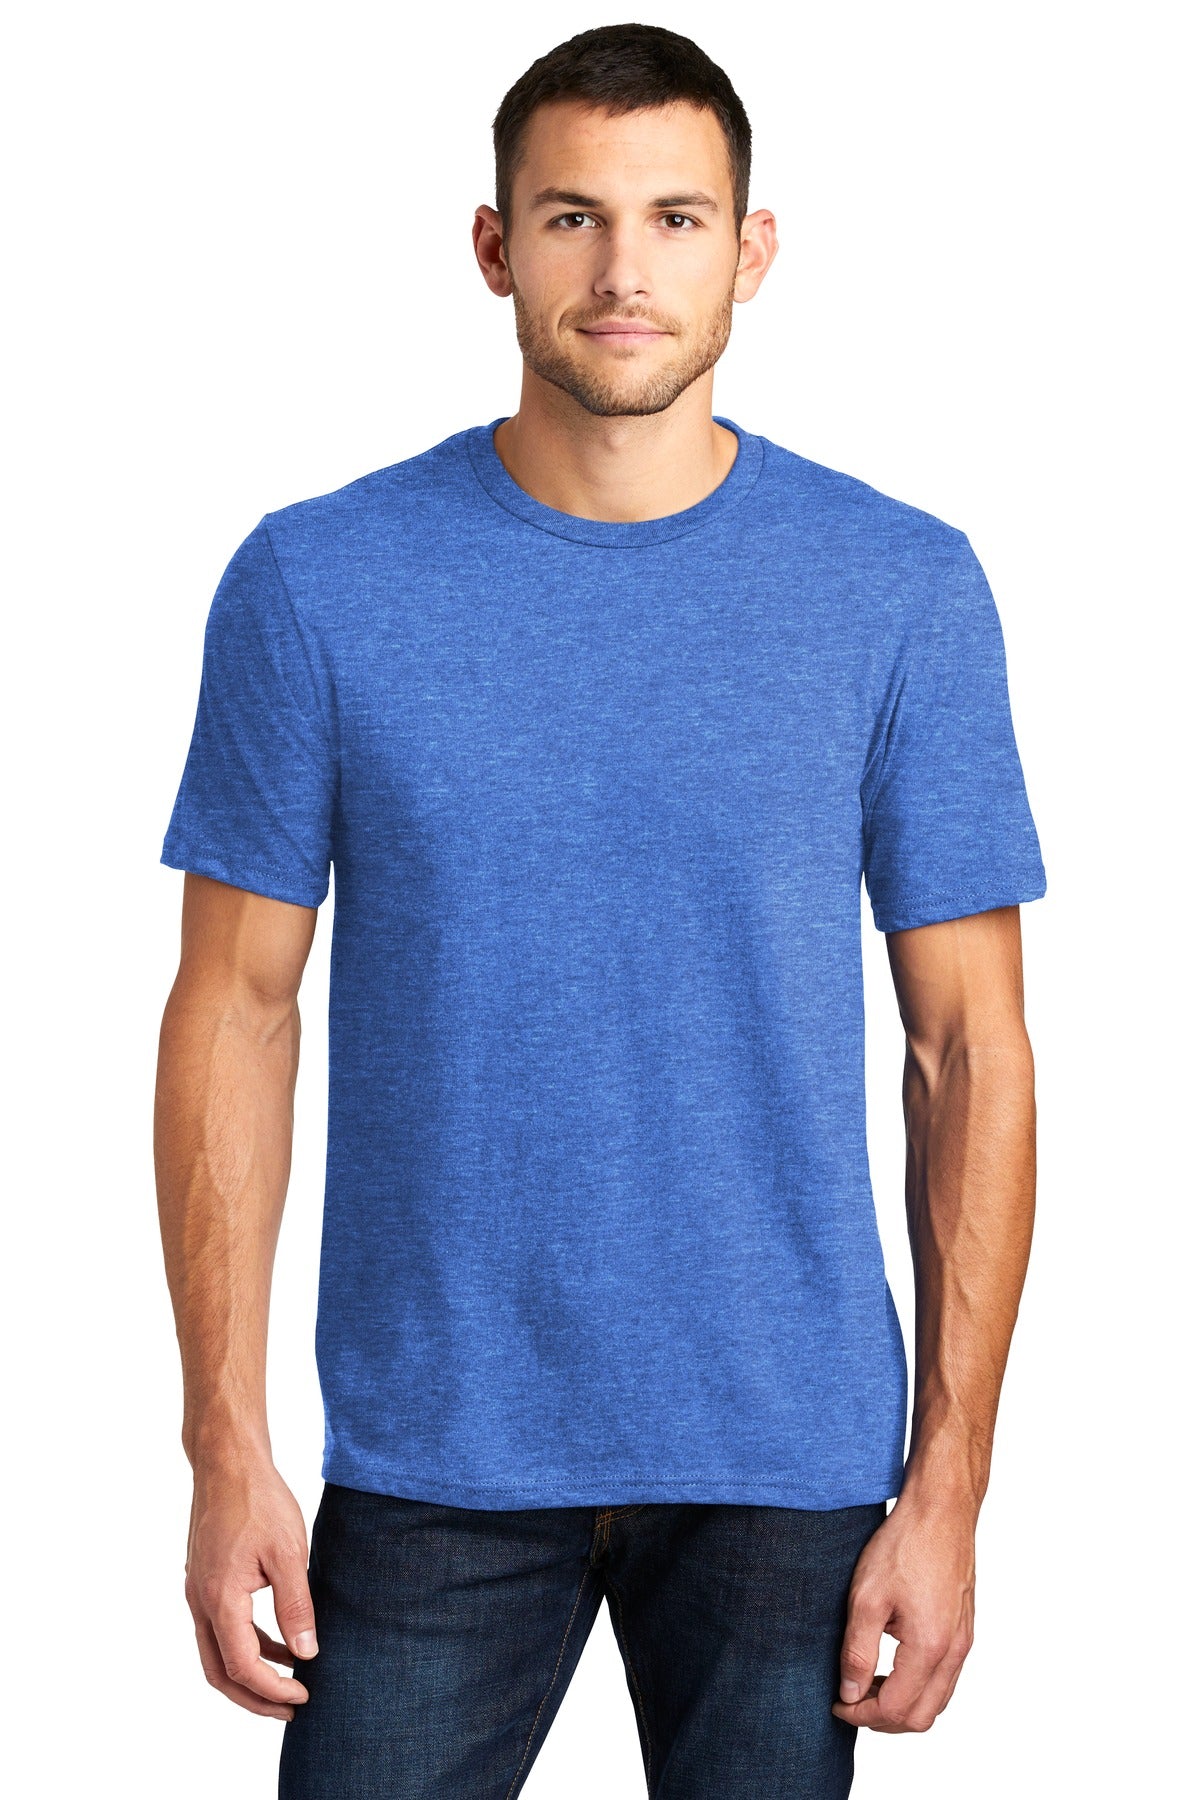 District® Very Important Tee®. DT6000 [Heathered Royal] - DFW Impression